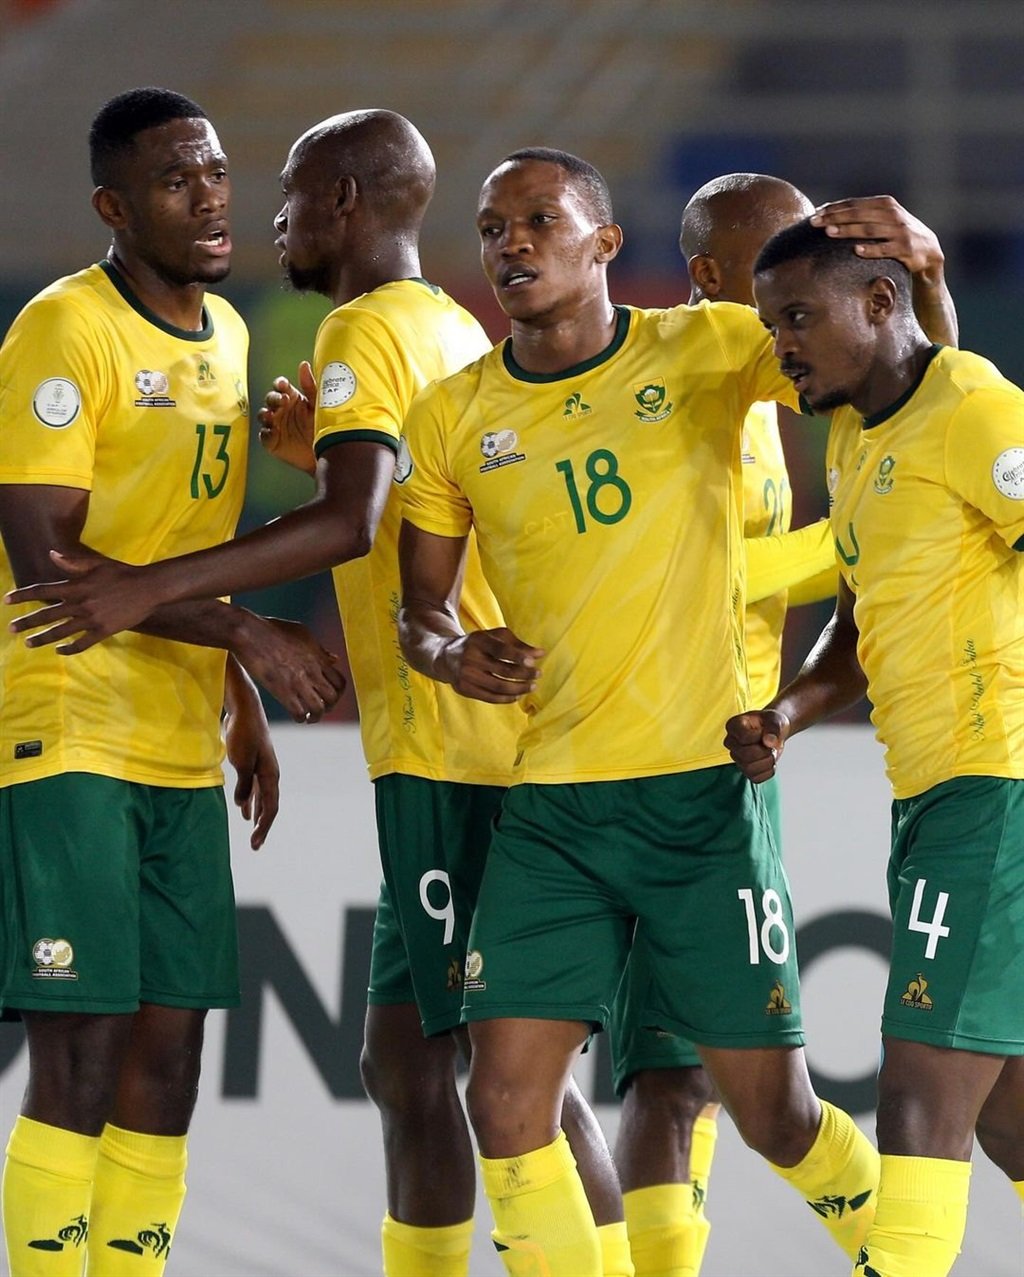 As Bafana Bafana gear up to meet Morocco in a highly anticipated Africa Cup of Nations last-16 crunch clash at the Laurent Pokou Stadium in San Pedro, Hugo Broos' men have received plenty of support from the President, Pitso Mosimane and SA's top clubs.